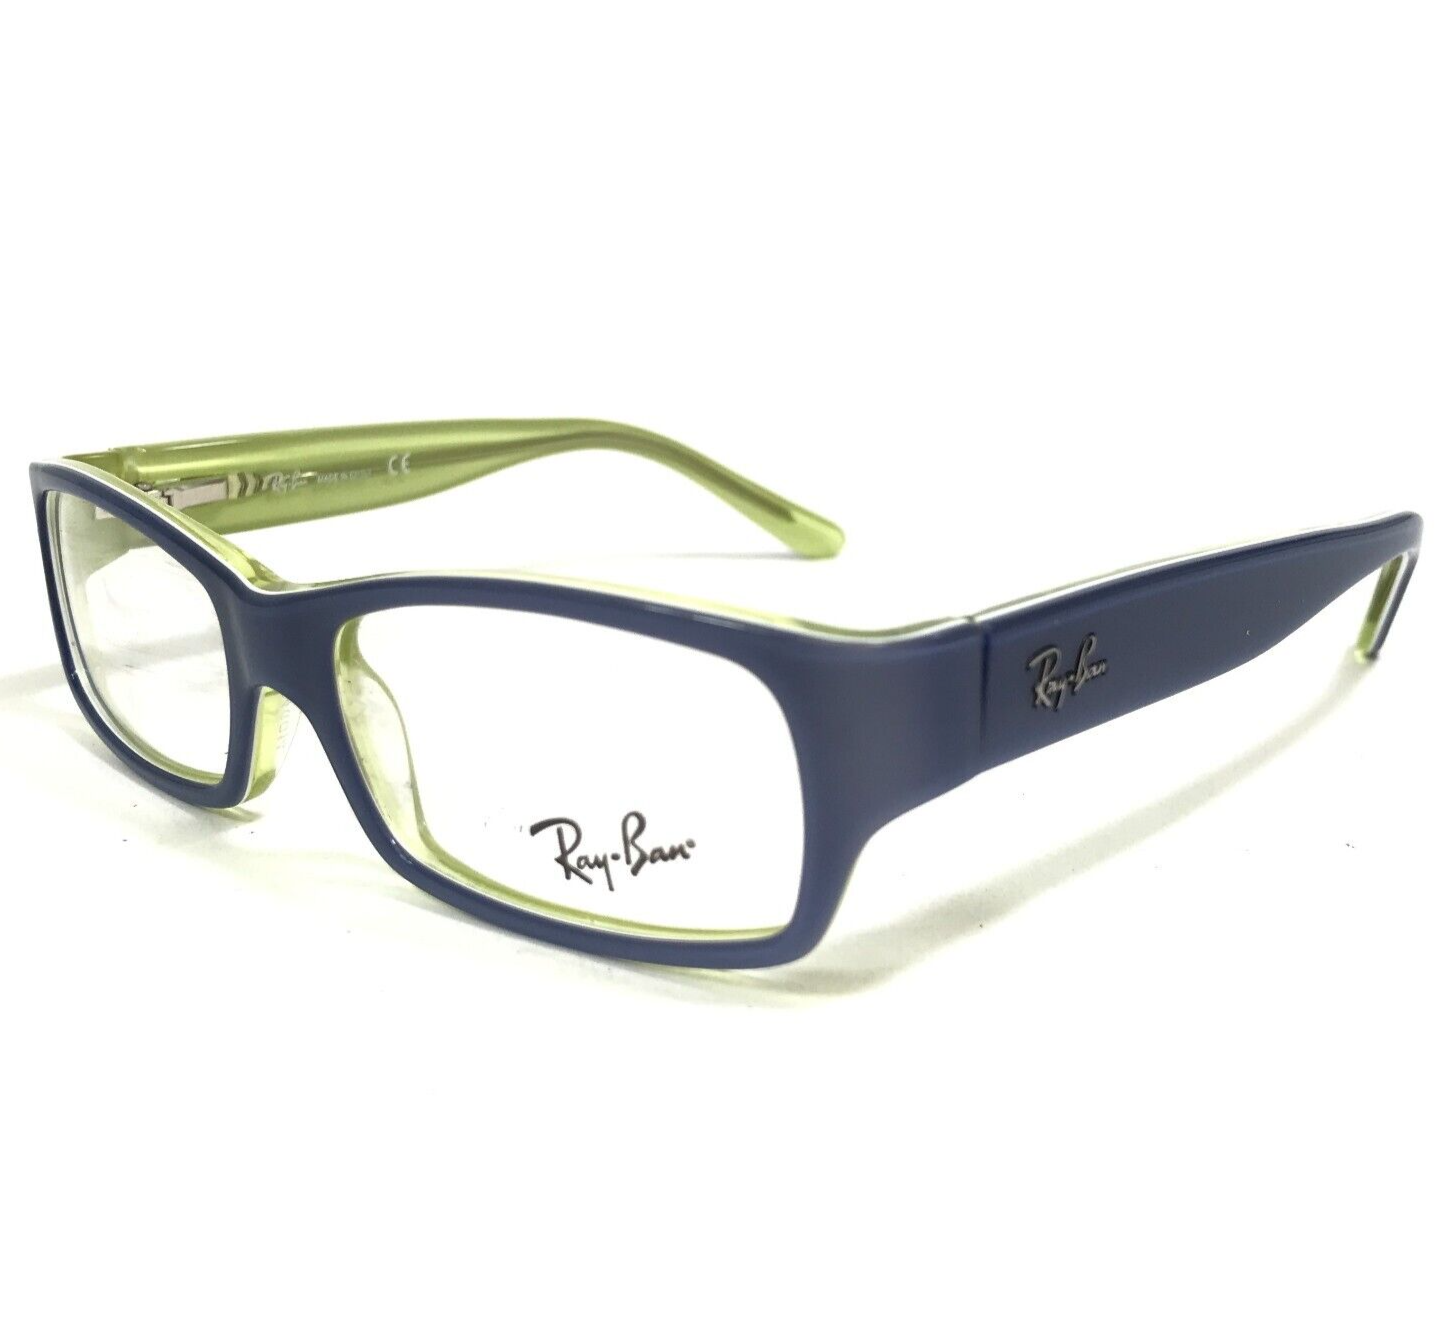 Primary image for Ray-Ban Kids Eyeglasses Frames RB1513 3502 Matte Blue Clear Green 46-14-125